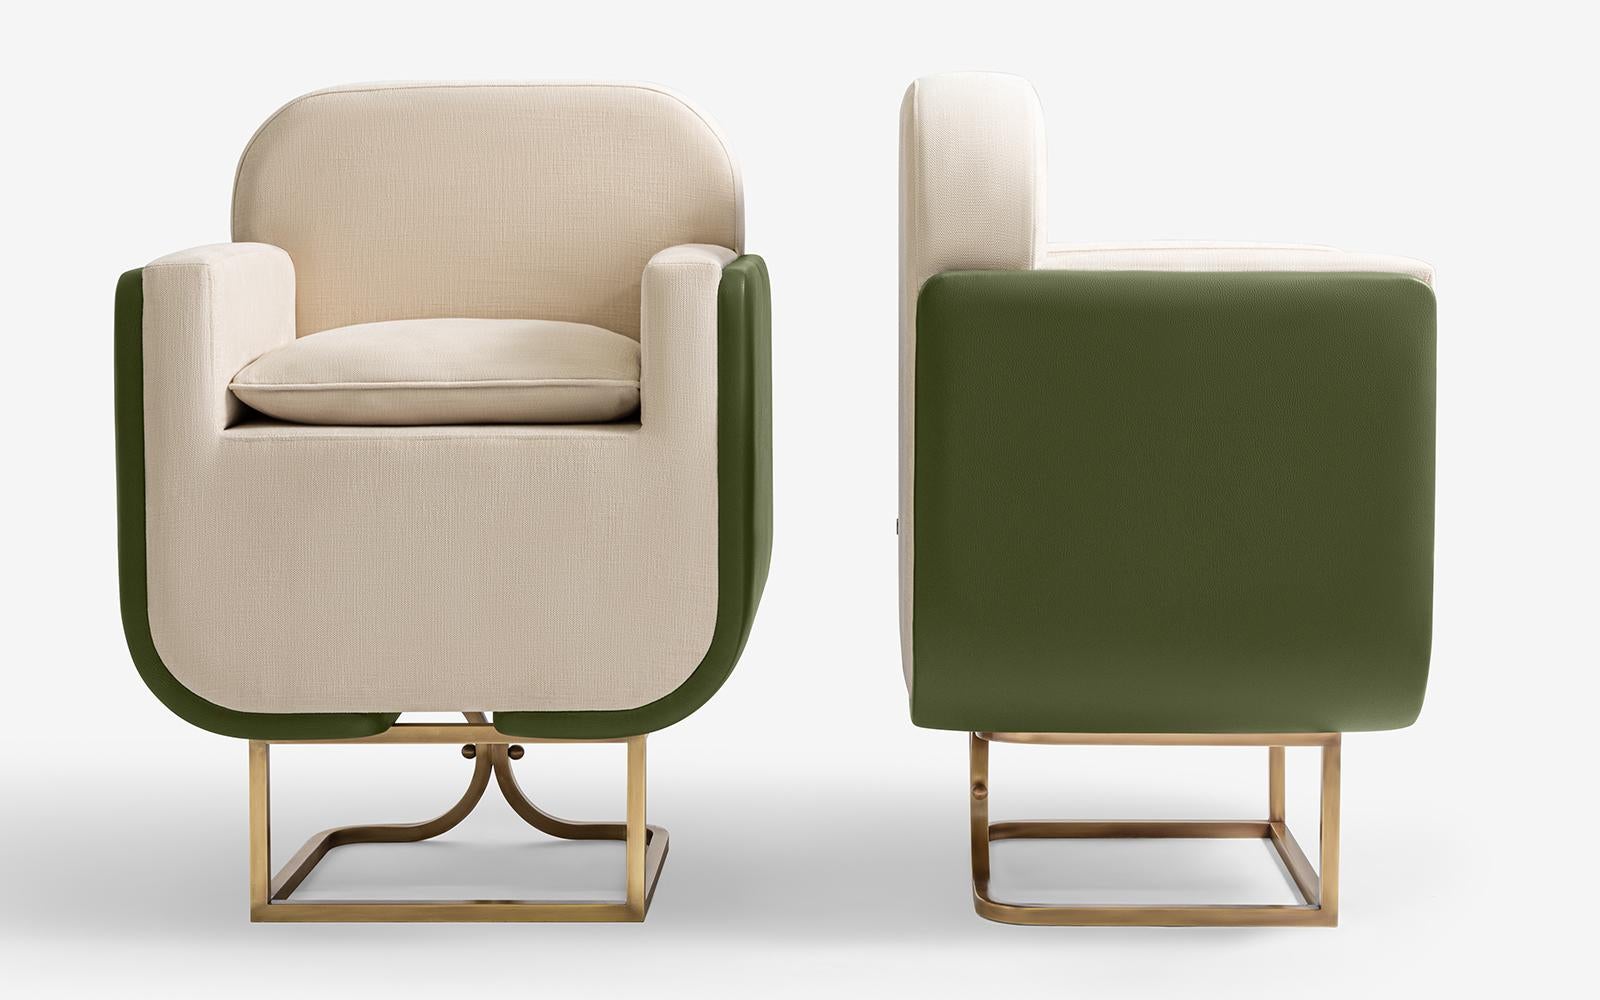 Modern Up Green Brass &Fux Leather Chair For Sale